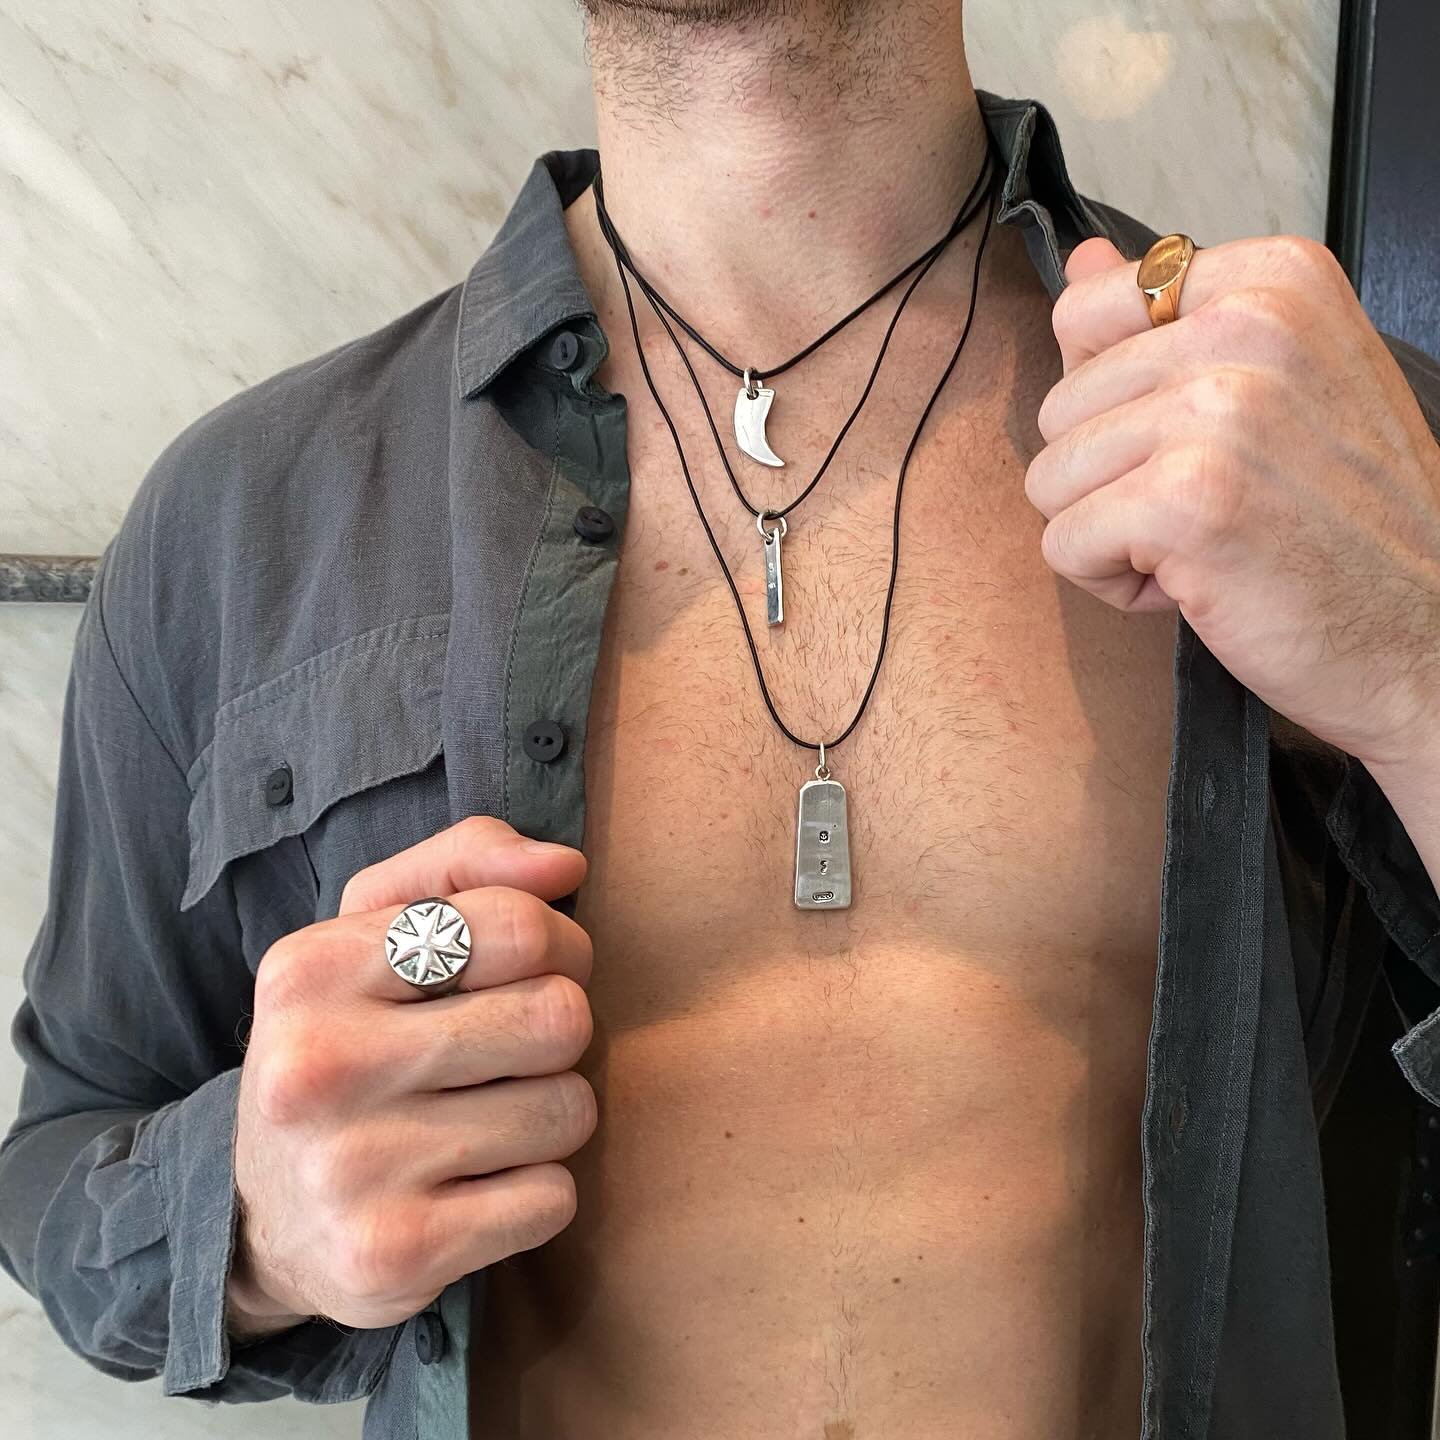 IS IT SATURDAY YET !?!?! 😛 ready for weekend vibes with sterling &amp; 18 Karat from #SebastianCilento #BCSydney #SWT &amp;  #TalismanTraderCo &hellip; all made here in Oz 🐨 #HandmadeJewelery #SignetRings #Pendants #SouthWestTrader #OxfordStreetPad